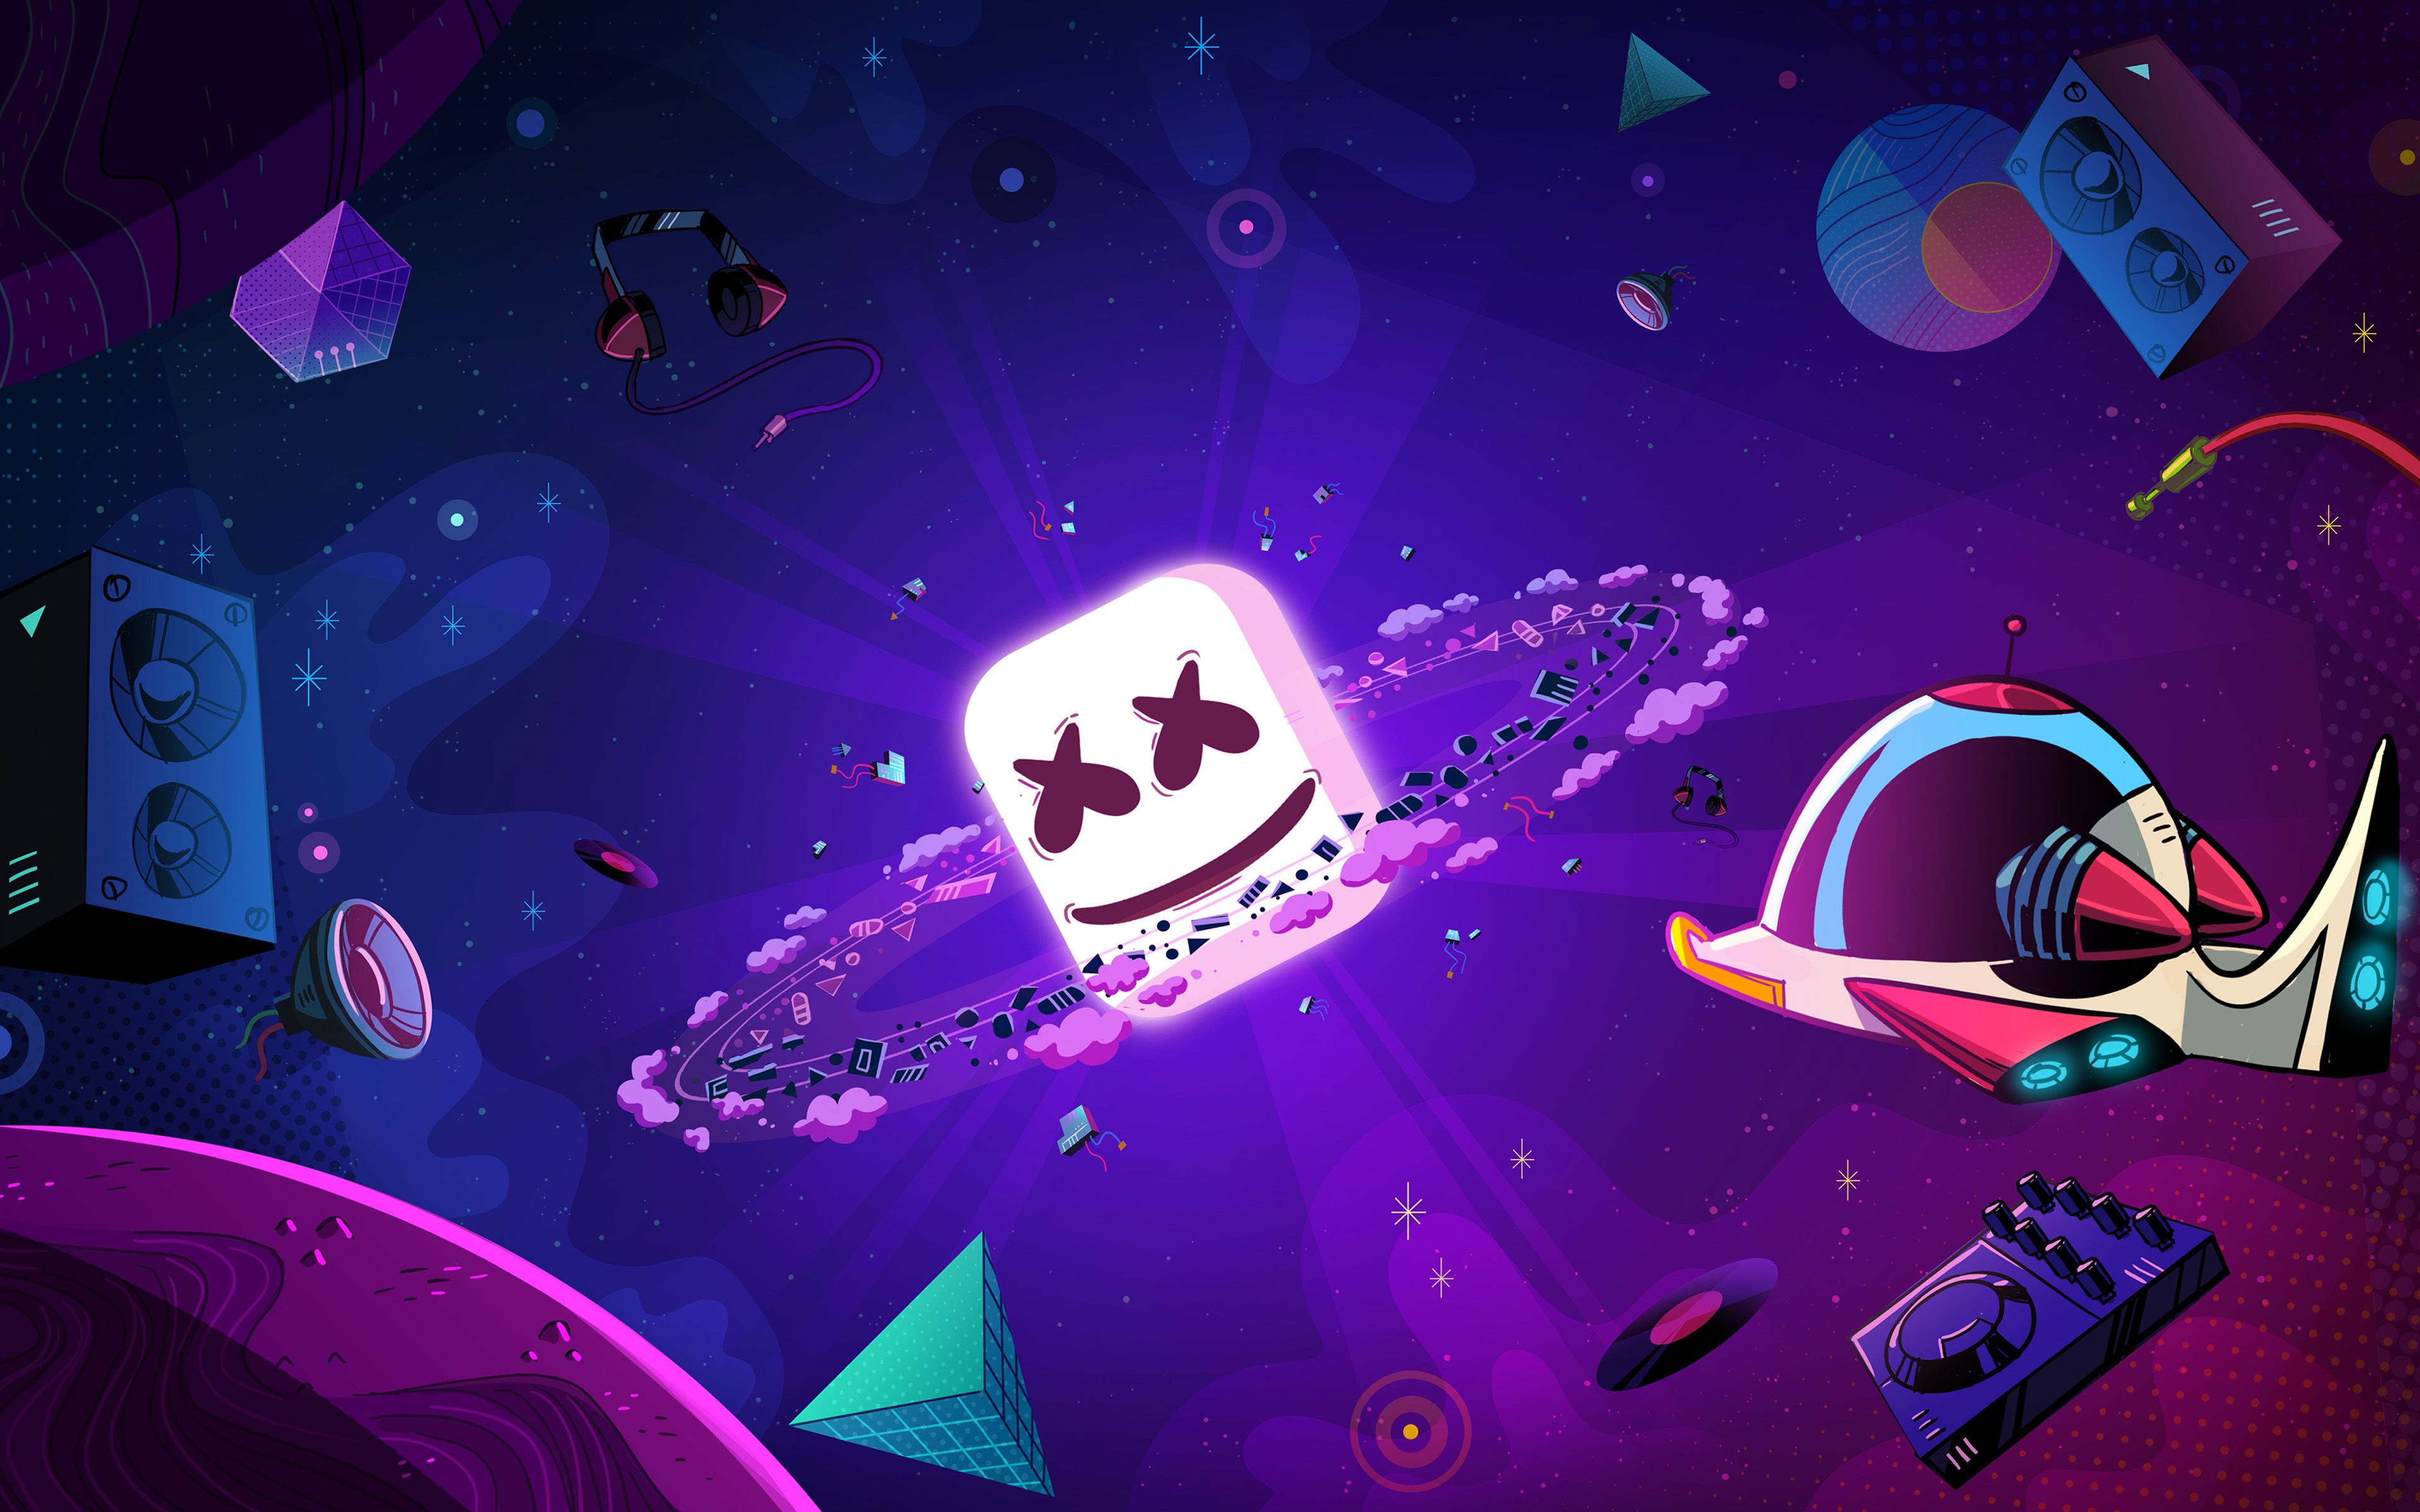 Download wallpaper Flying Marshmello, 4k, abstract art, american DJ, Christopher Comstock, Marshmello, galaxy, DJ Marshmello, DJs, Marshmello in space for desktop with resolution 3840x2400. High Quality HD picture wallpaper